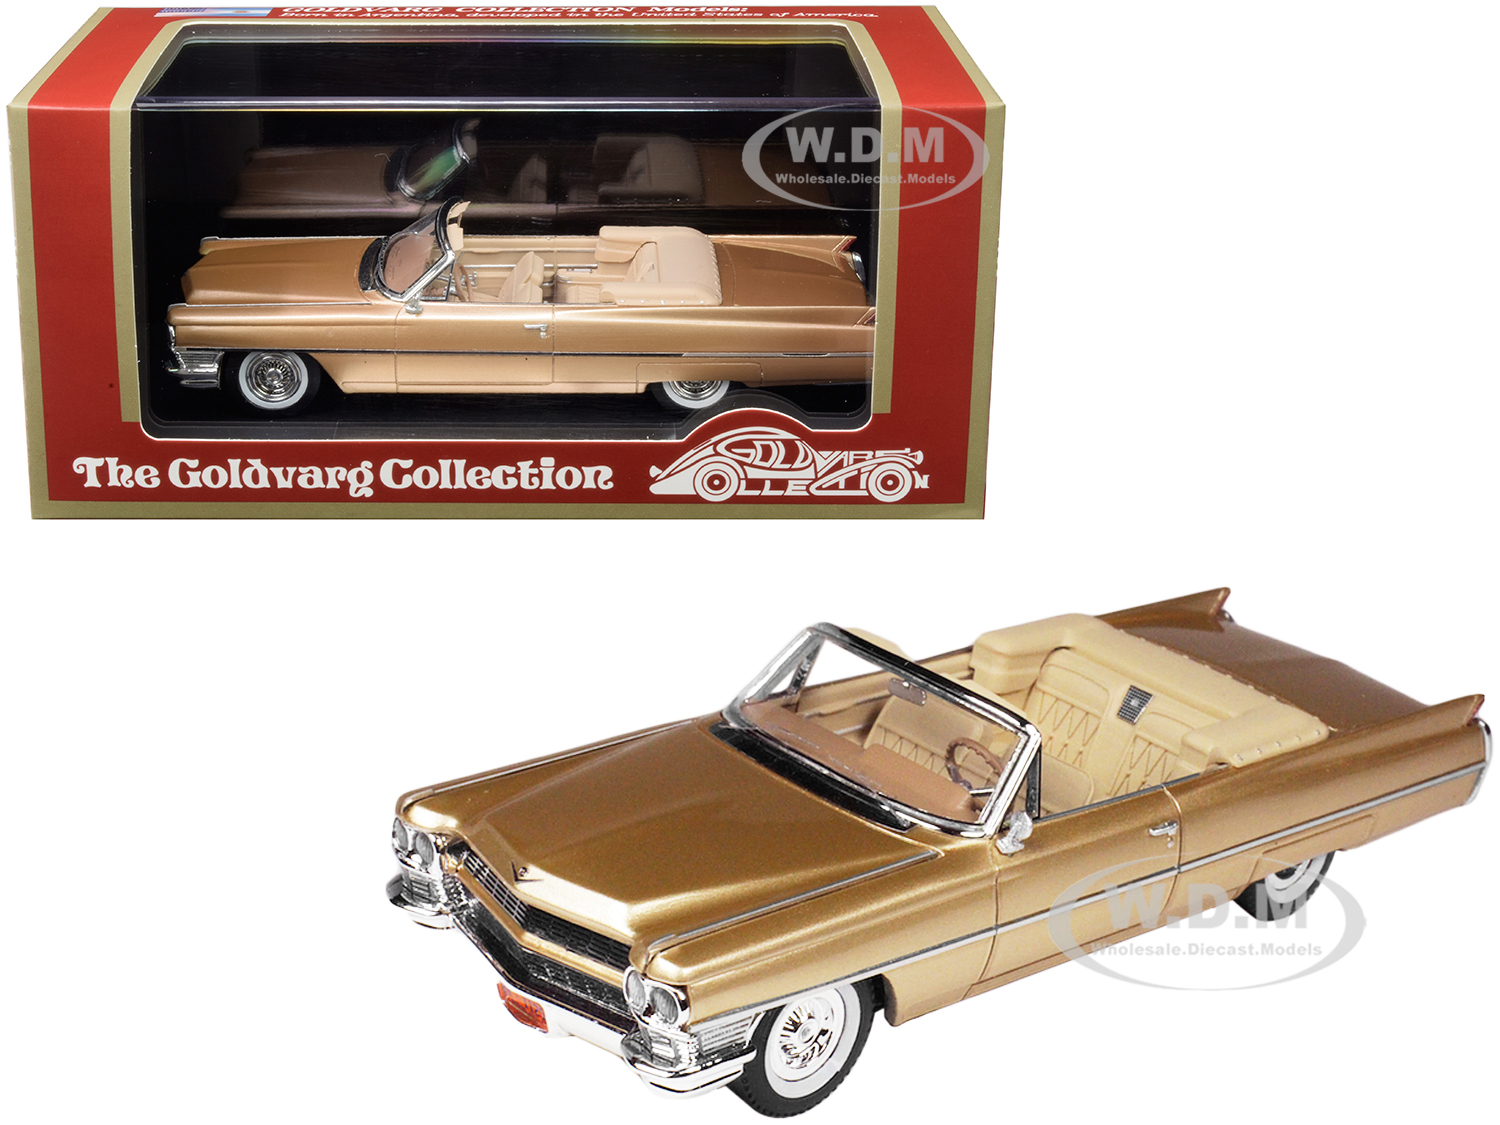 1964 Cadillac Deville Convertible Firemist (metallic) Saddle Tan Limited Edition To 220 Pieces Worldwide 1/43 Model Car By Goldvarg Collection